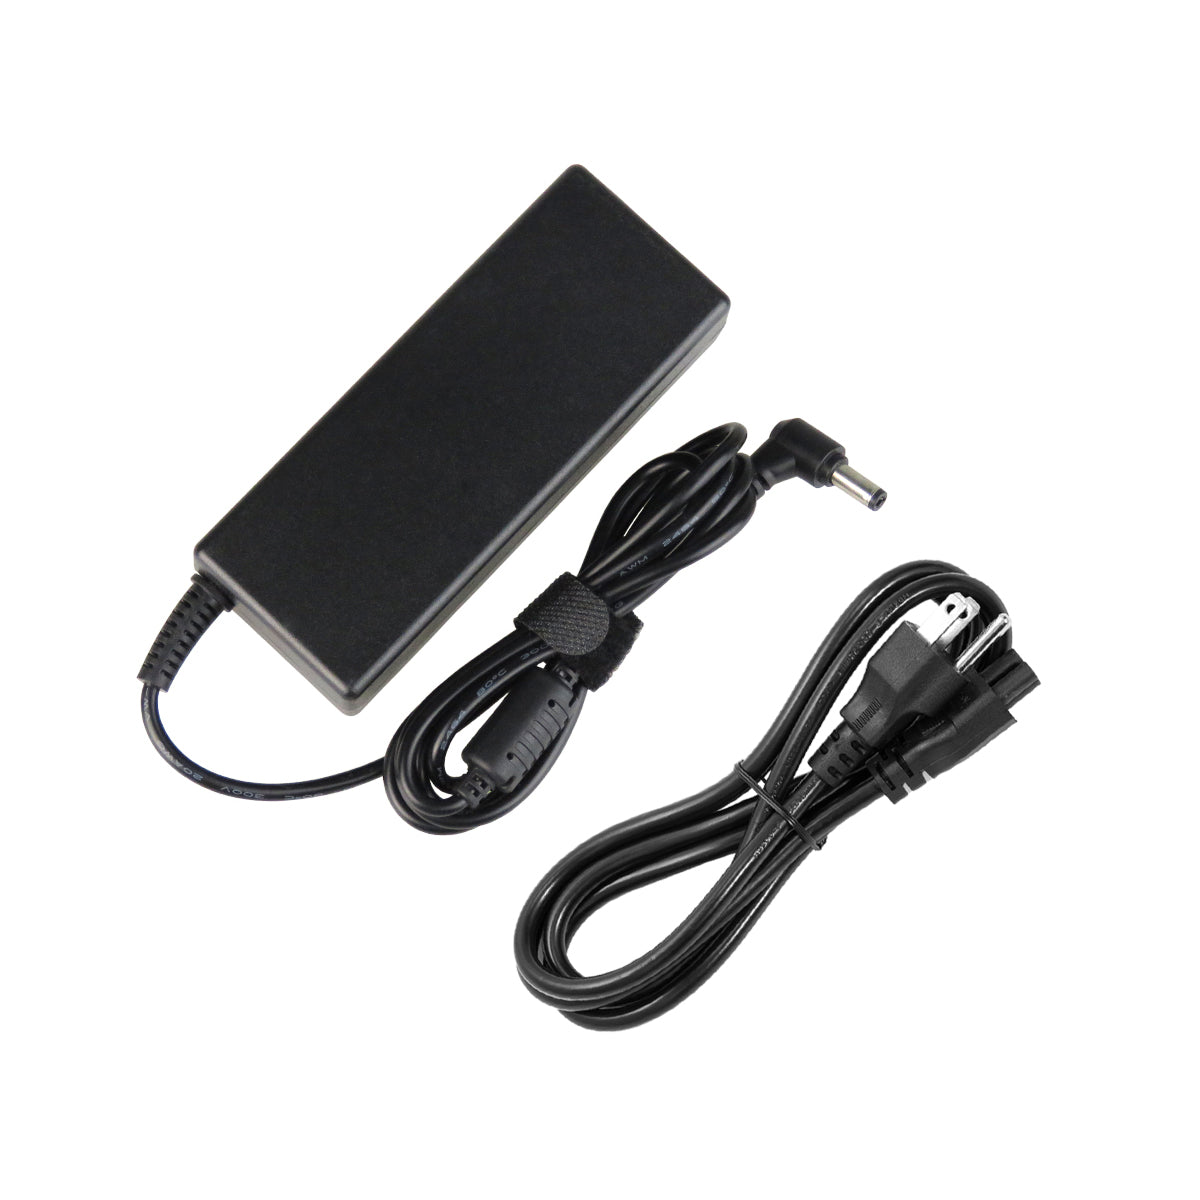 AC Adapter Charger for ASUS u80a Series Notebook.